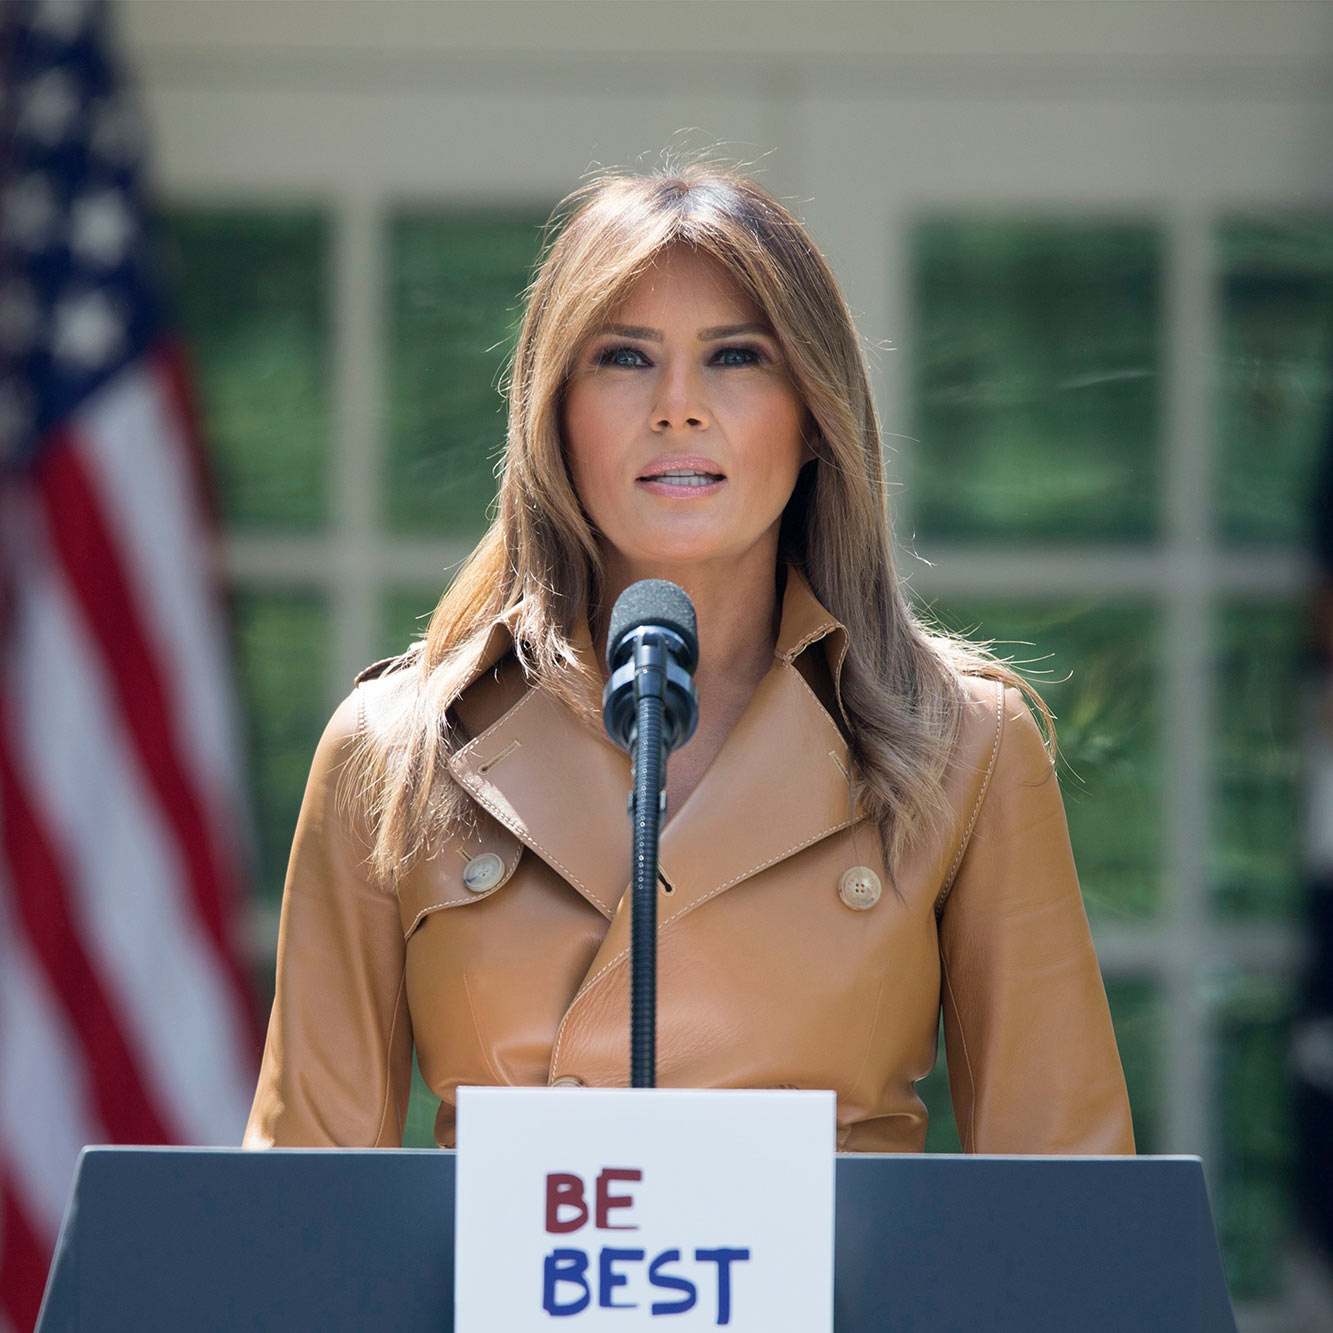 Did Melania Trump Plagiarize the Obamas (Again) With Her New Be Best ...